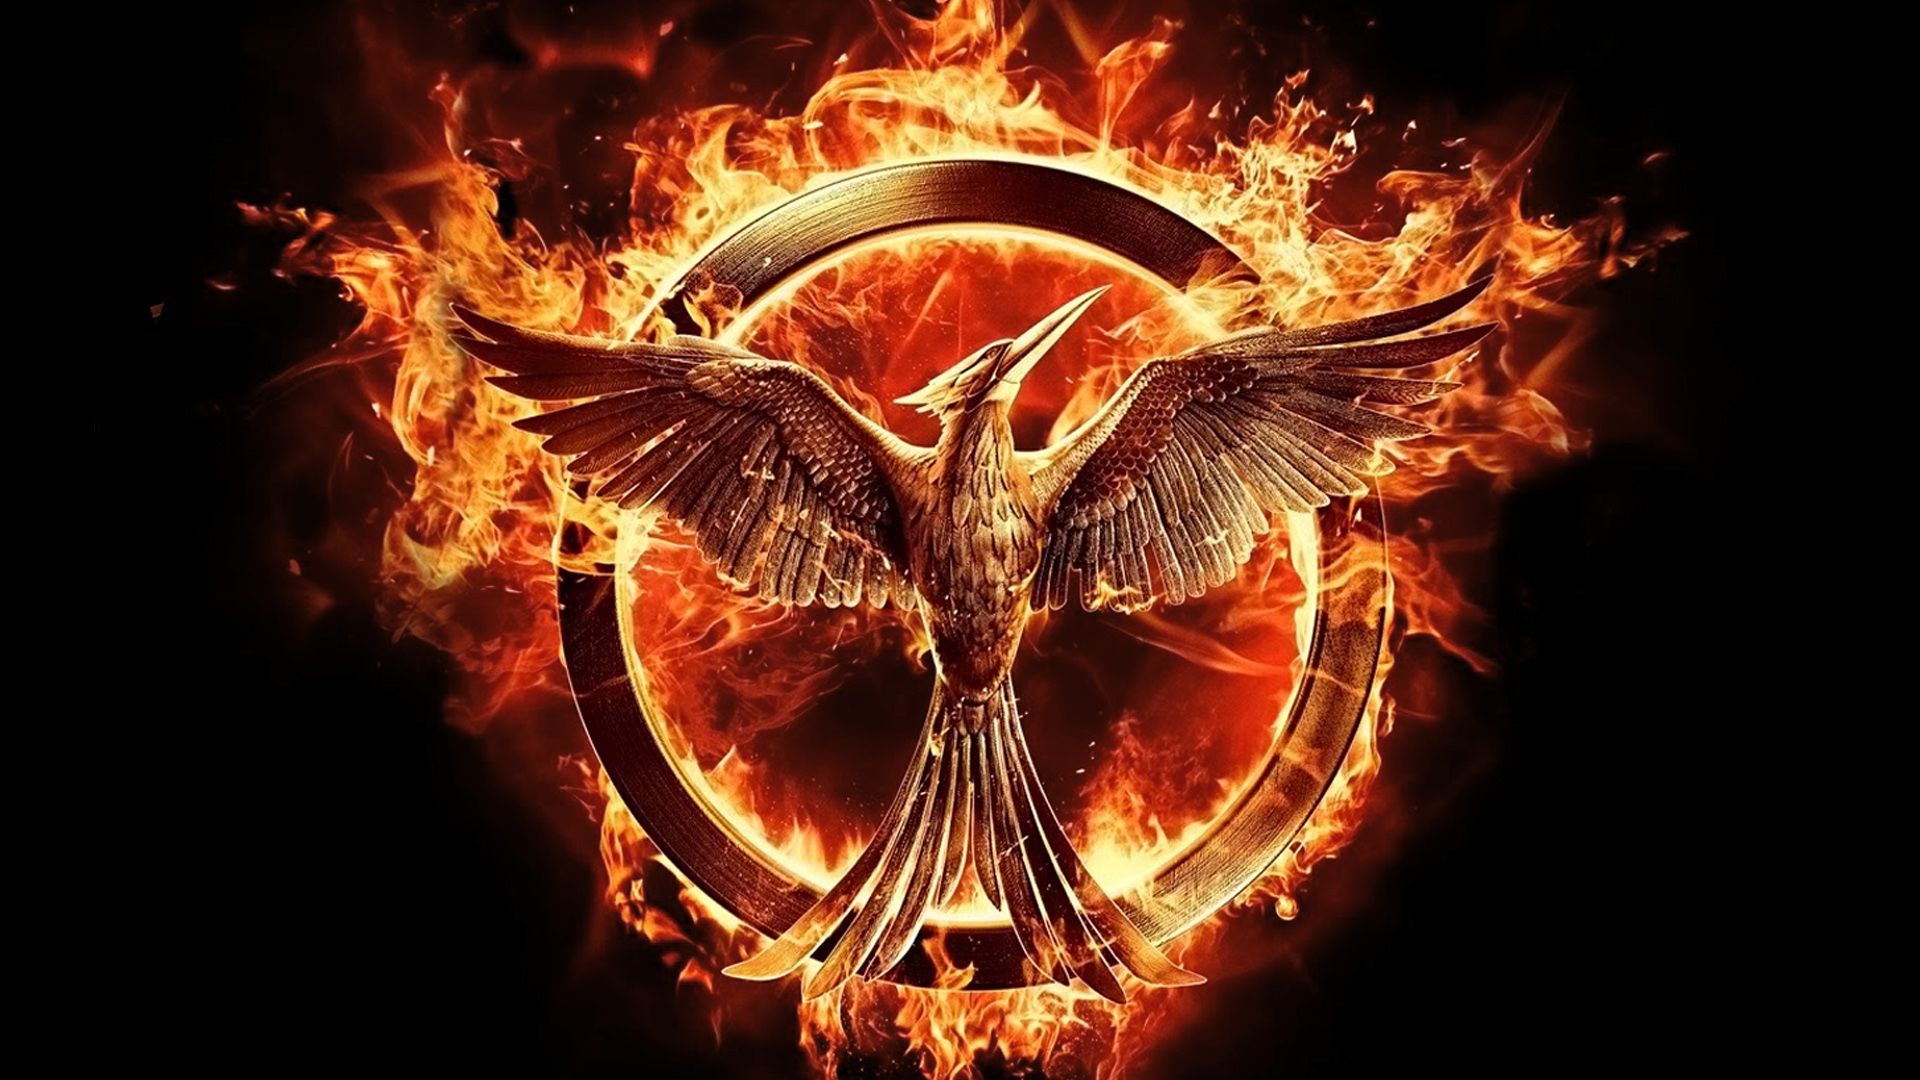 Movie The Hunger Games Mockingjay Part 1 1920x1080